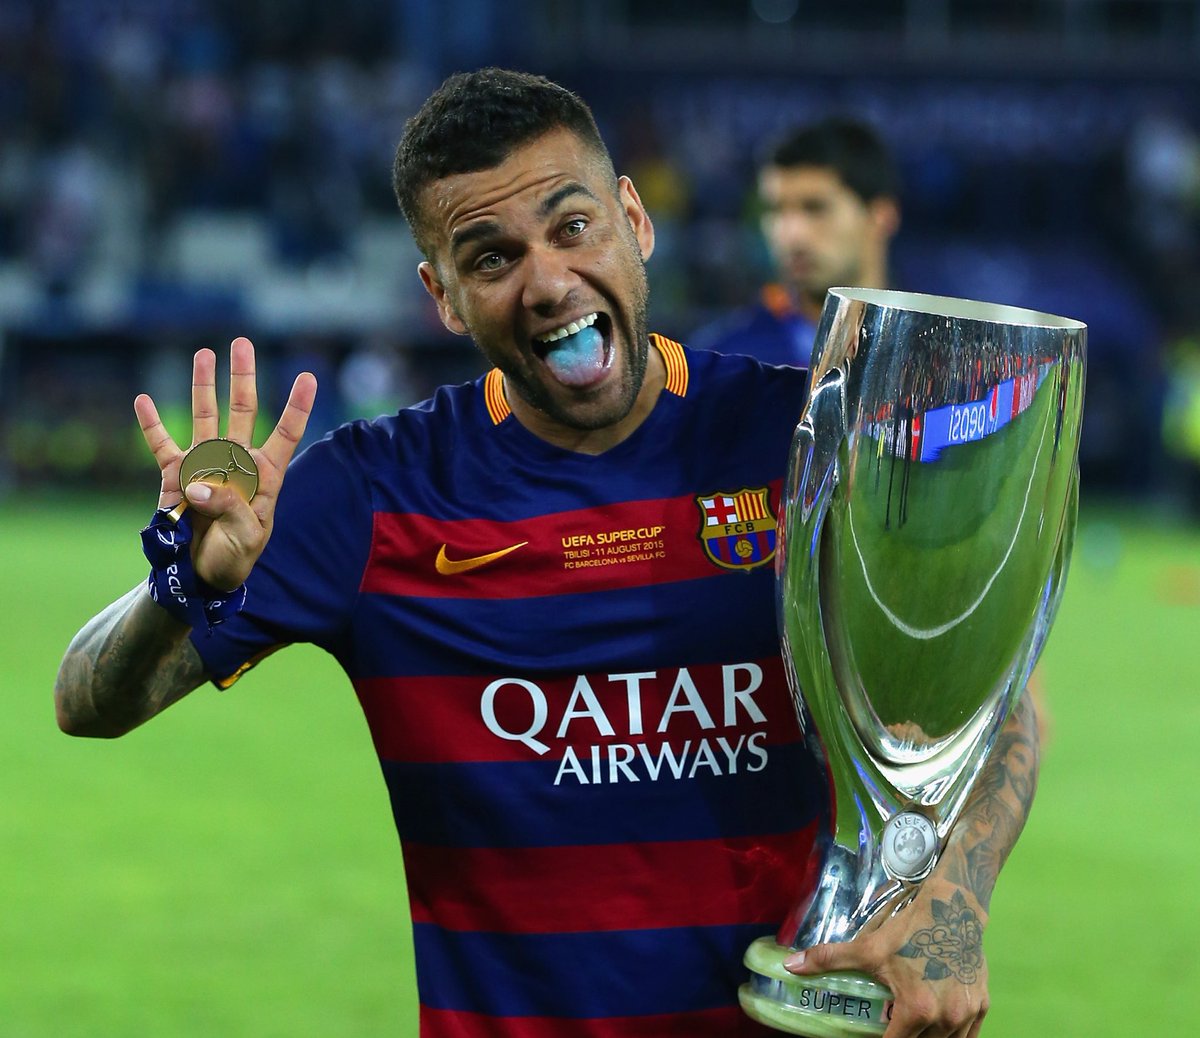 Dani Alves back to Barcelona, here we go! He’s returning at Barça as free agent, just waiting for La Liga approval. Xavi wanted Dani Alves as new signing to help immediatly 🔵🔴🤝 #FCB

Deal agreed on a one-season contract after direct contact with Alves’ camp today 🇧🇷 #DaniAlves